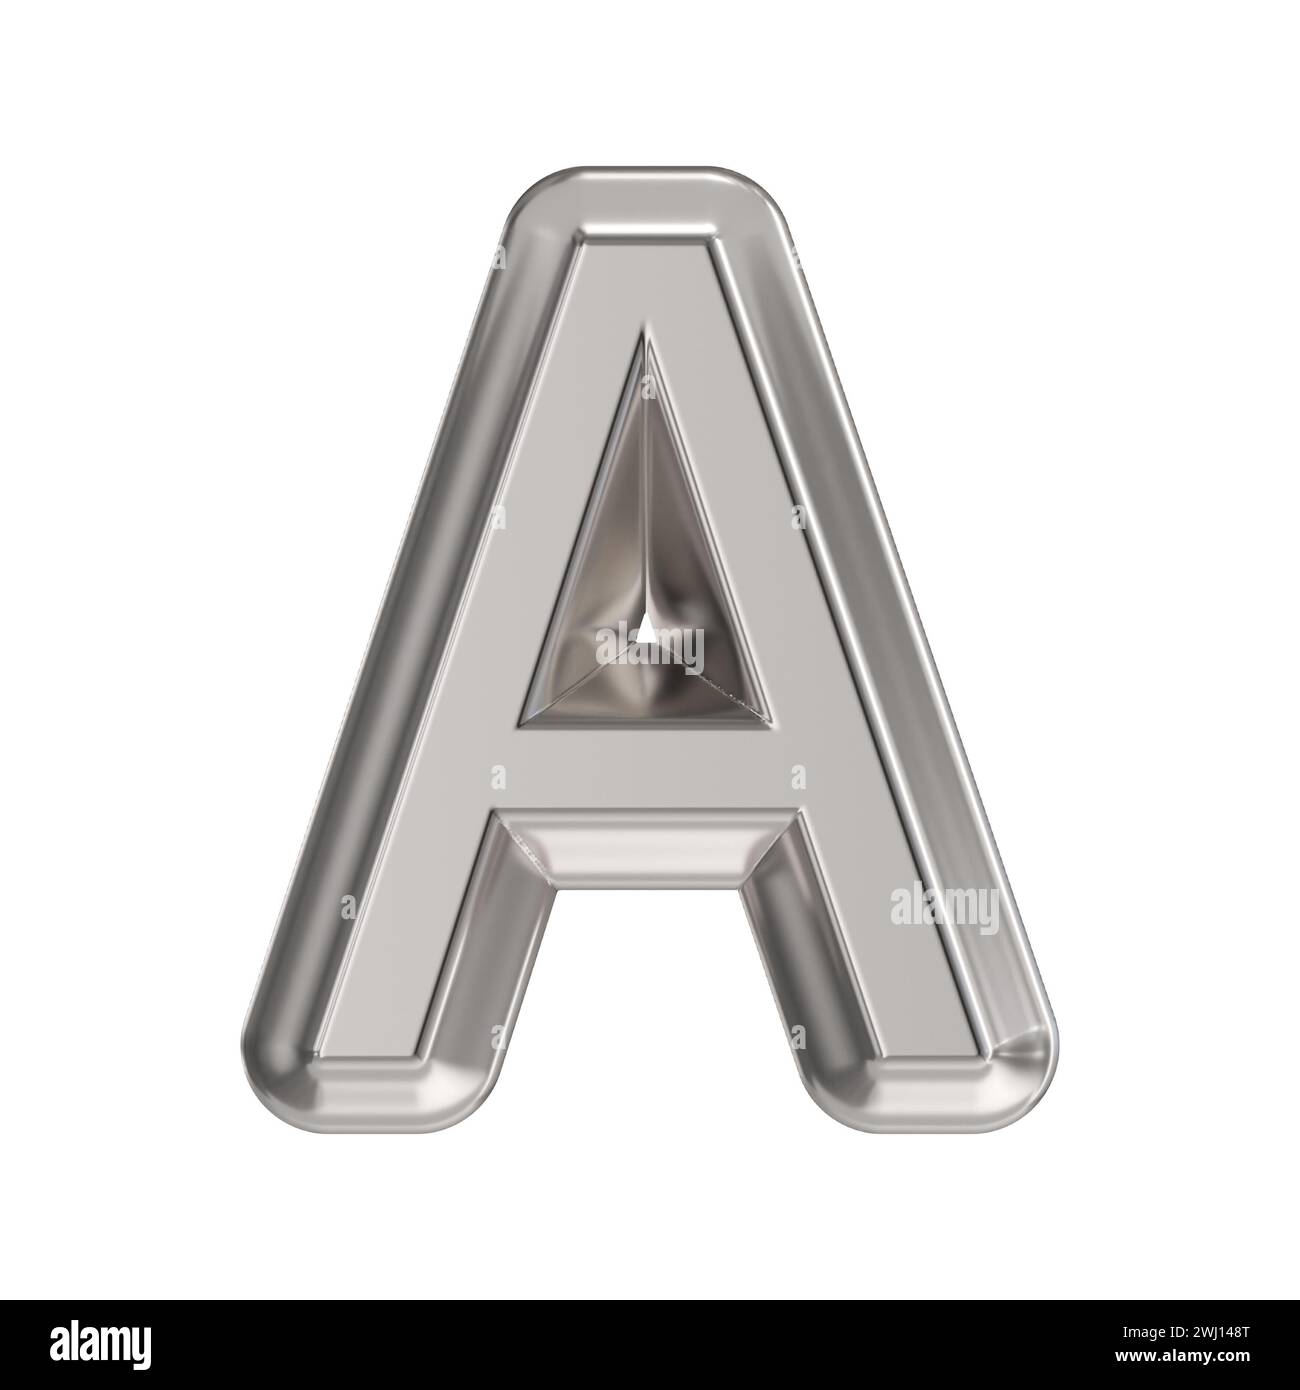 Steel font Letter A 3D rendering illustration isolated on white background Stock Photo